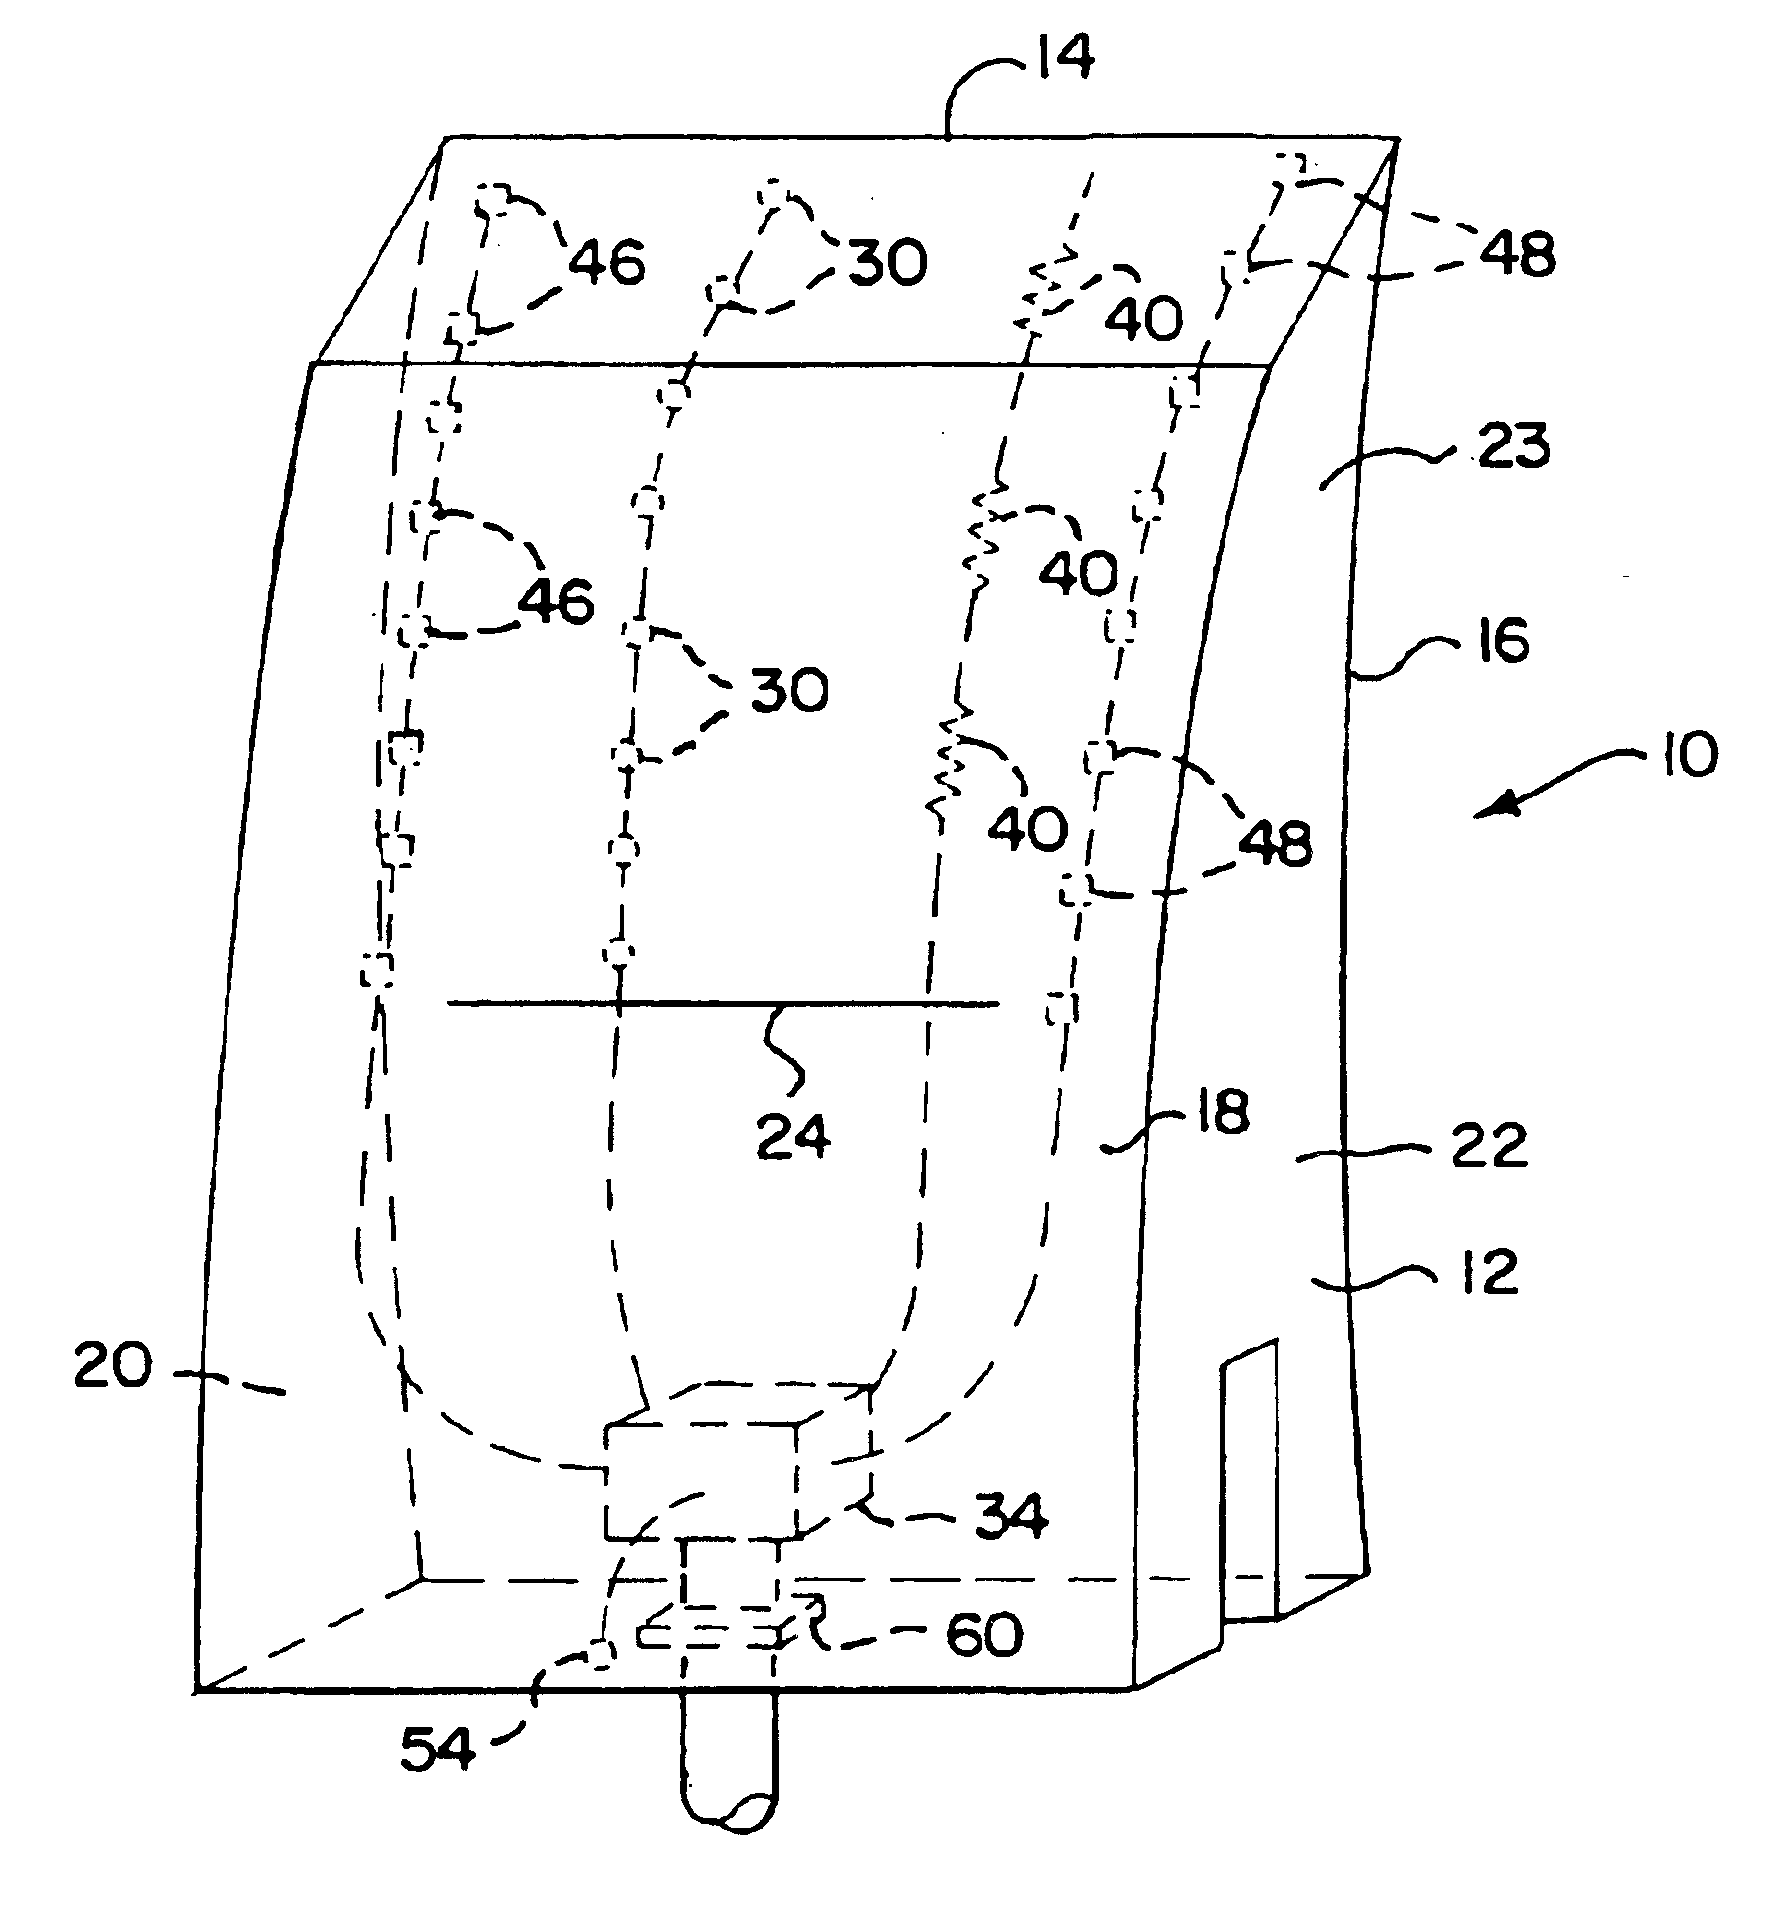 Conveyor belt cleaner scraper blade with sensor and control system therefor